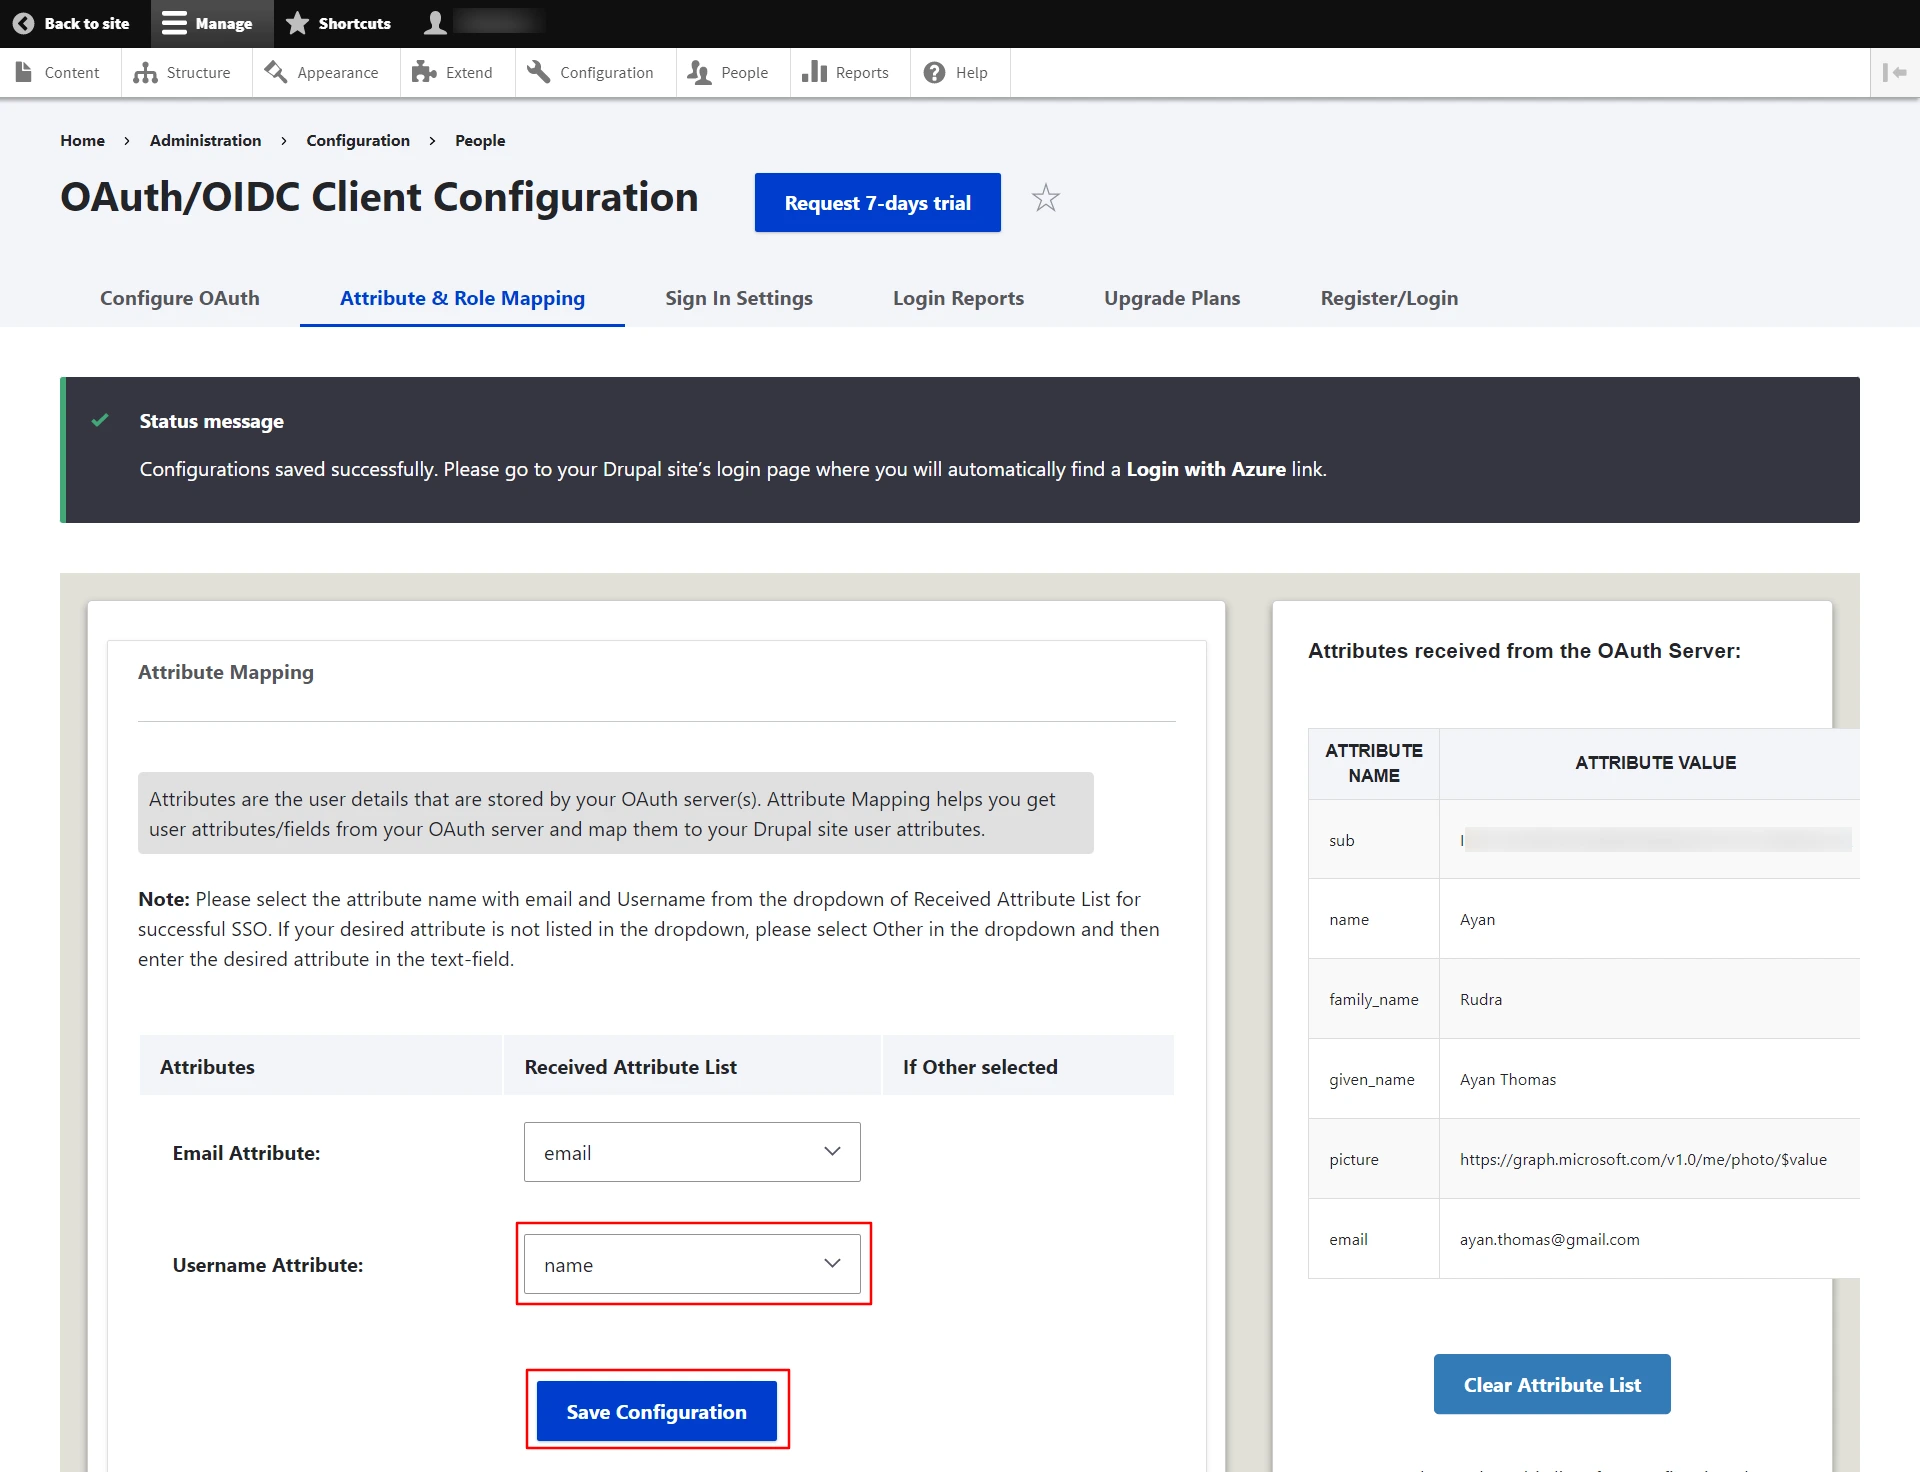 Drupal OAuth OpenID Single Single On - Select Username Attribute from the dropdown list